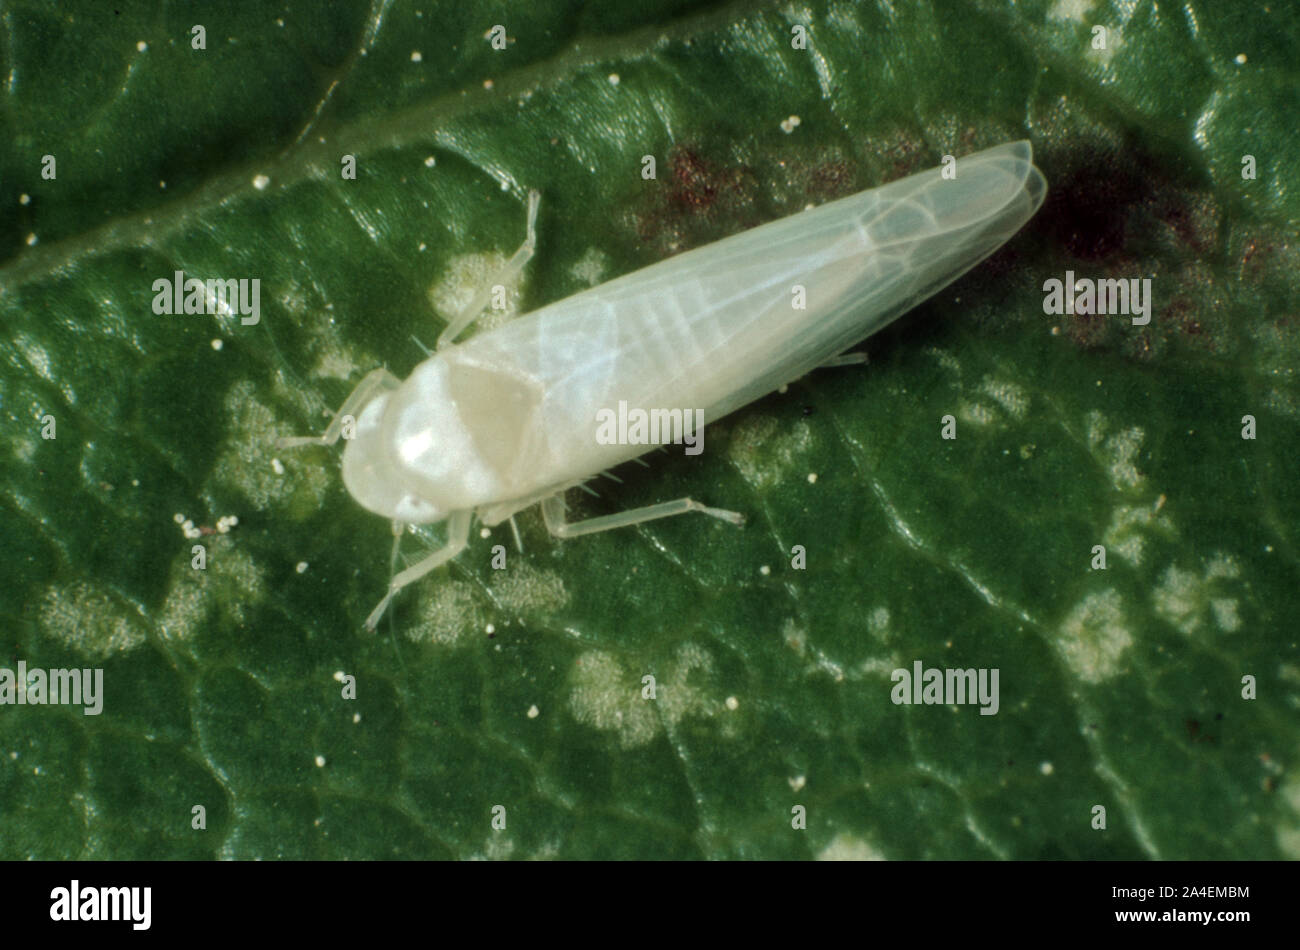 Rose leafhopper (Edwardsiana rosae) adult with fully developed wings enclosing the abdomen on a rose leaf Stock Photo